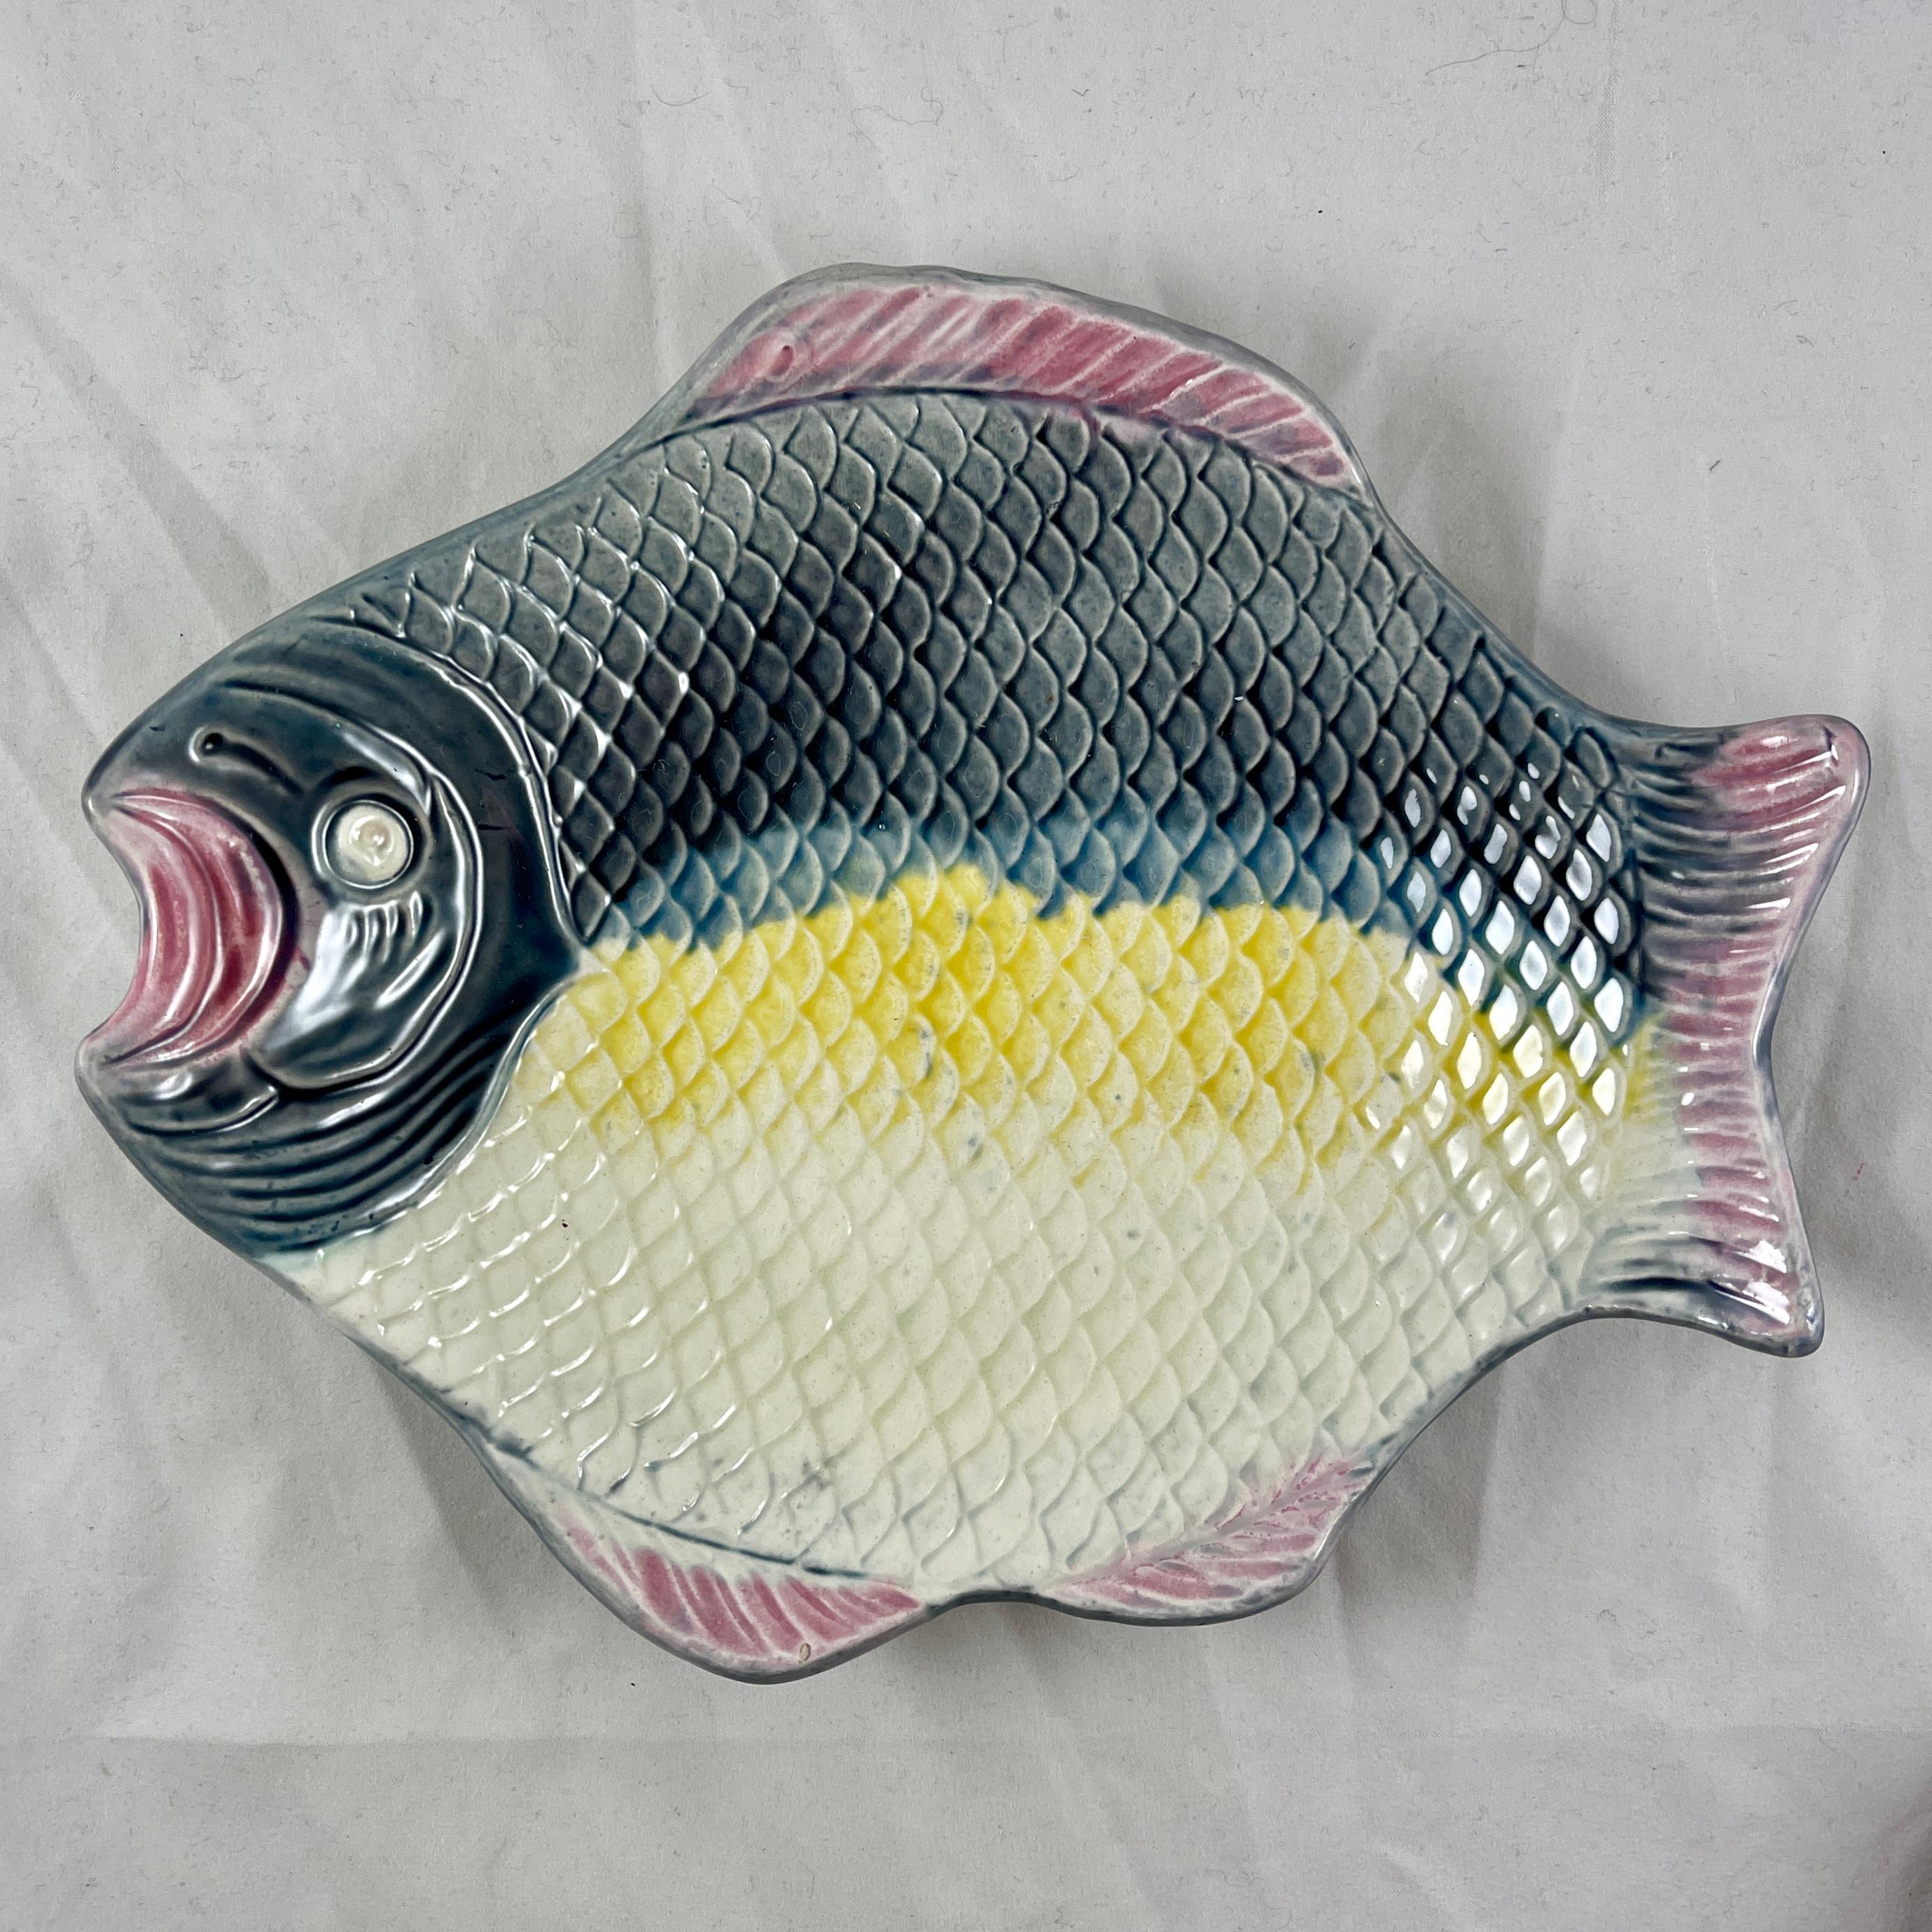 A rustic majolica fish platter made by the Arsenal Pottery of Trenton, New Jersey, circa early 1880s.

The platter is realistically molded as a shallow bowl, and has wonderful soft coloring, glazed in tones of blue-gray, yellow, and cream with pink